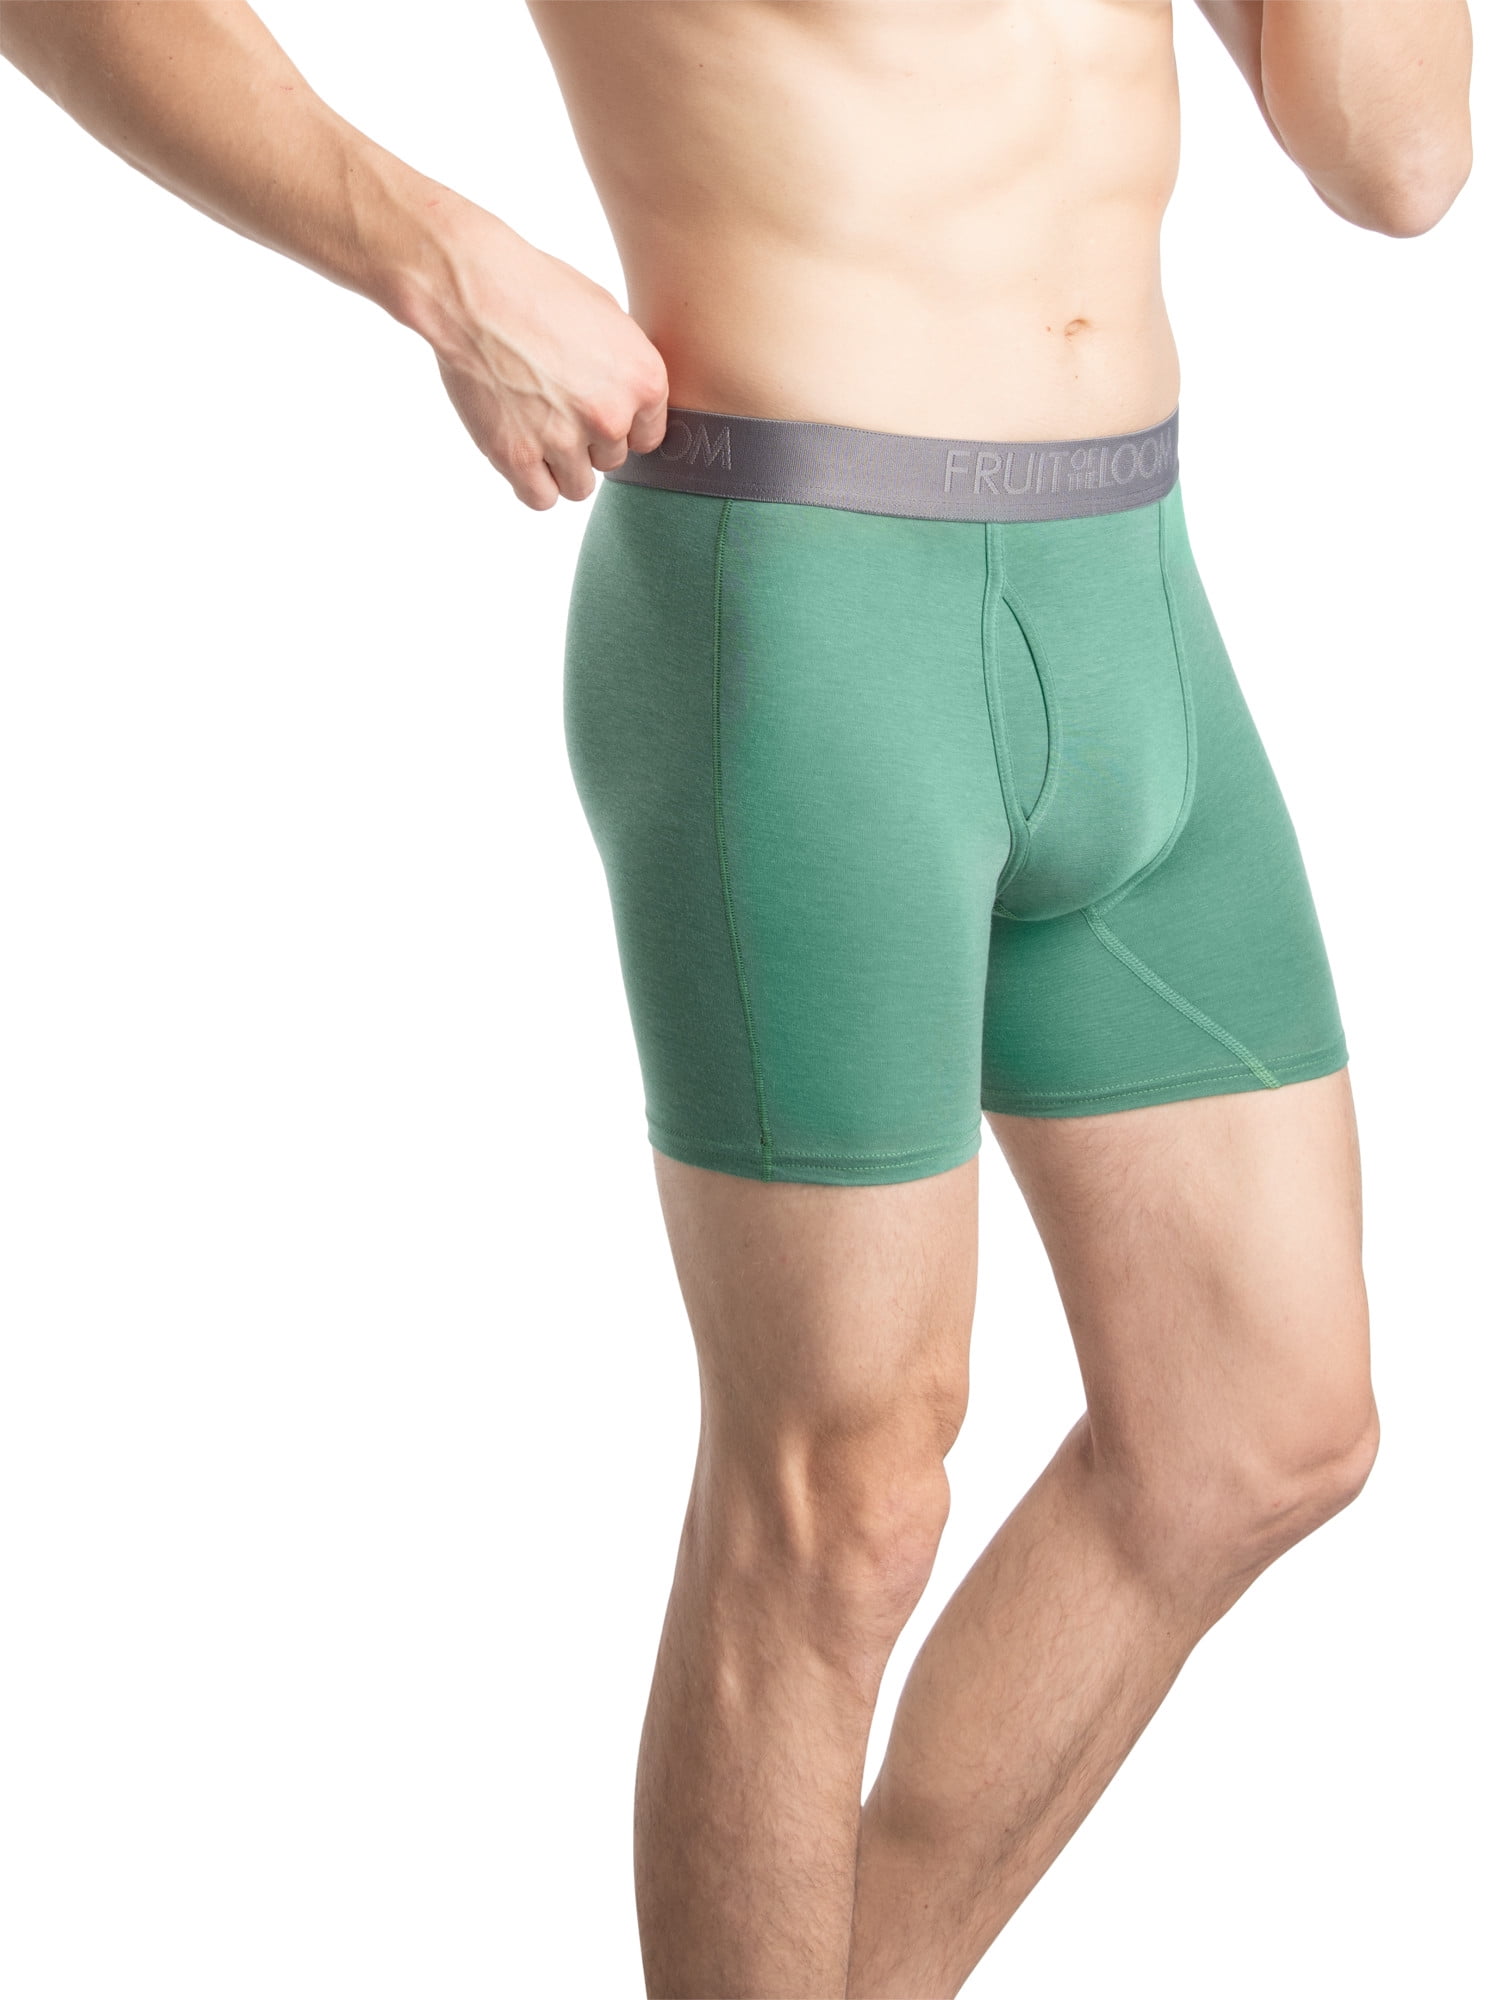 Fruit of the Loom Men's 360 Stretch Boxer Briefs (Quick Dry & Moisture  Wicking), Long Leg - Micro Stretch - 5 Pack Green/Blue/Grey, S price in UAE,  UAE